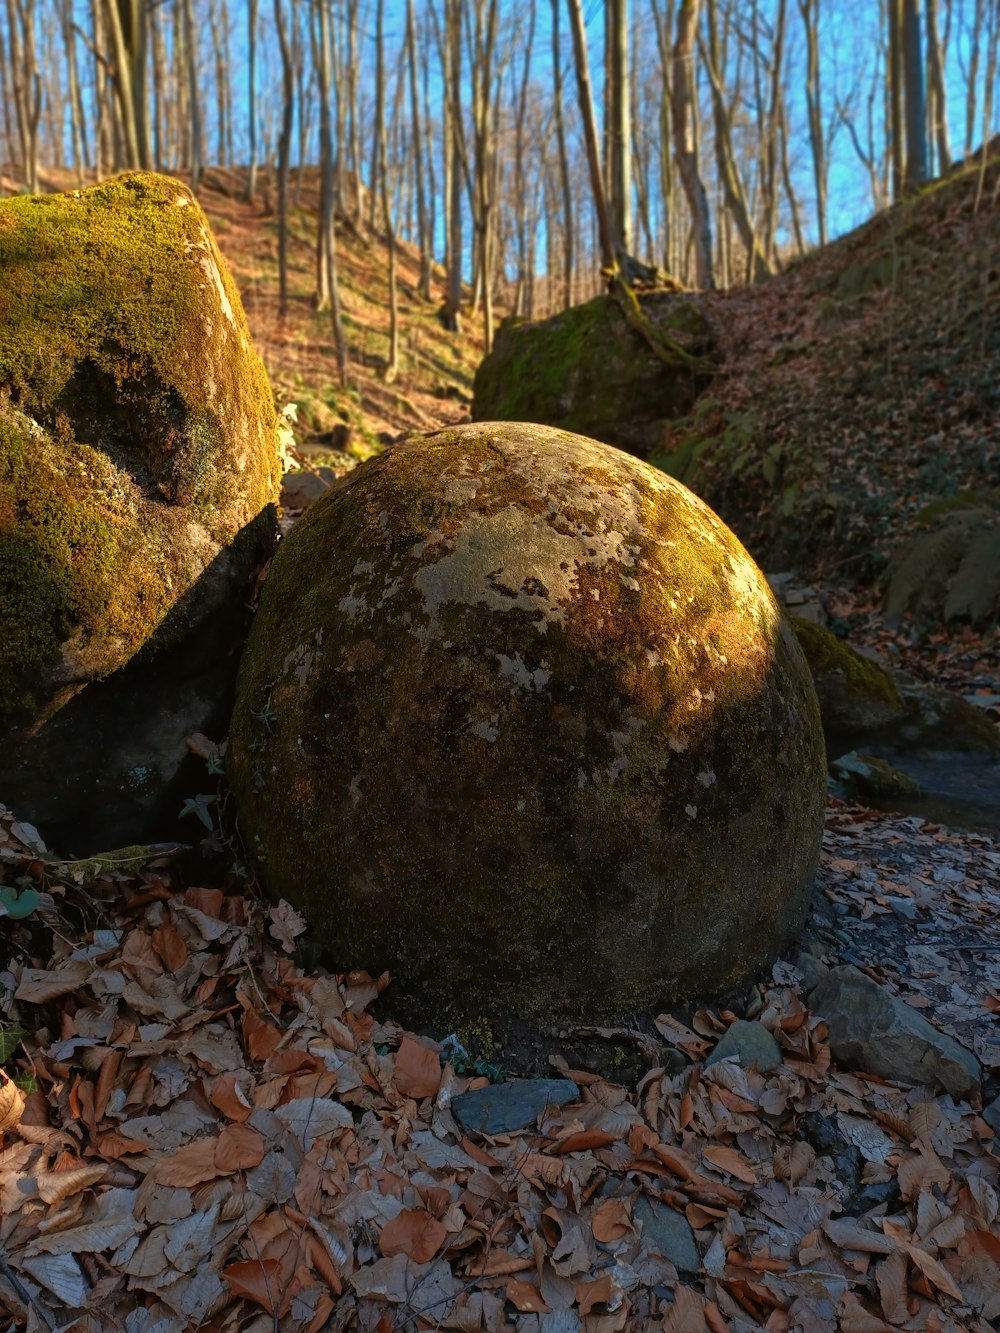 a group of large rocks in a forest